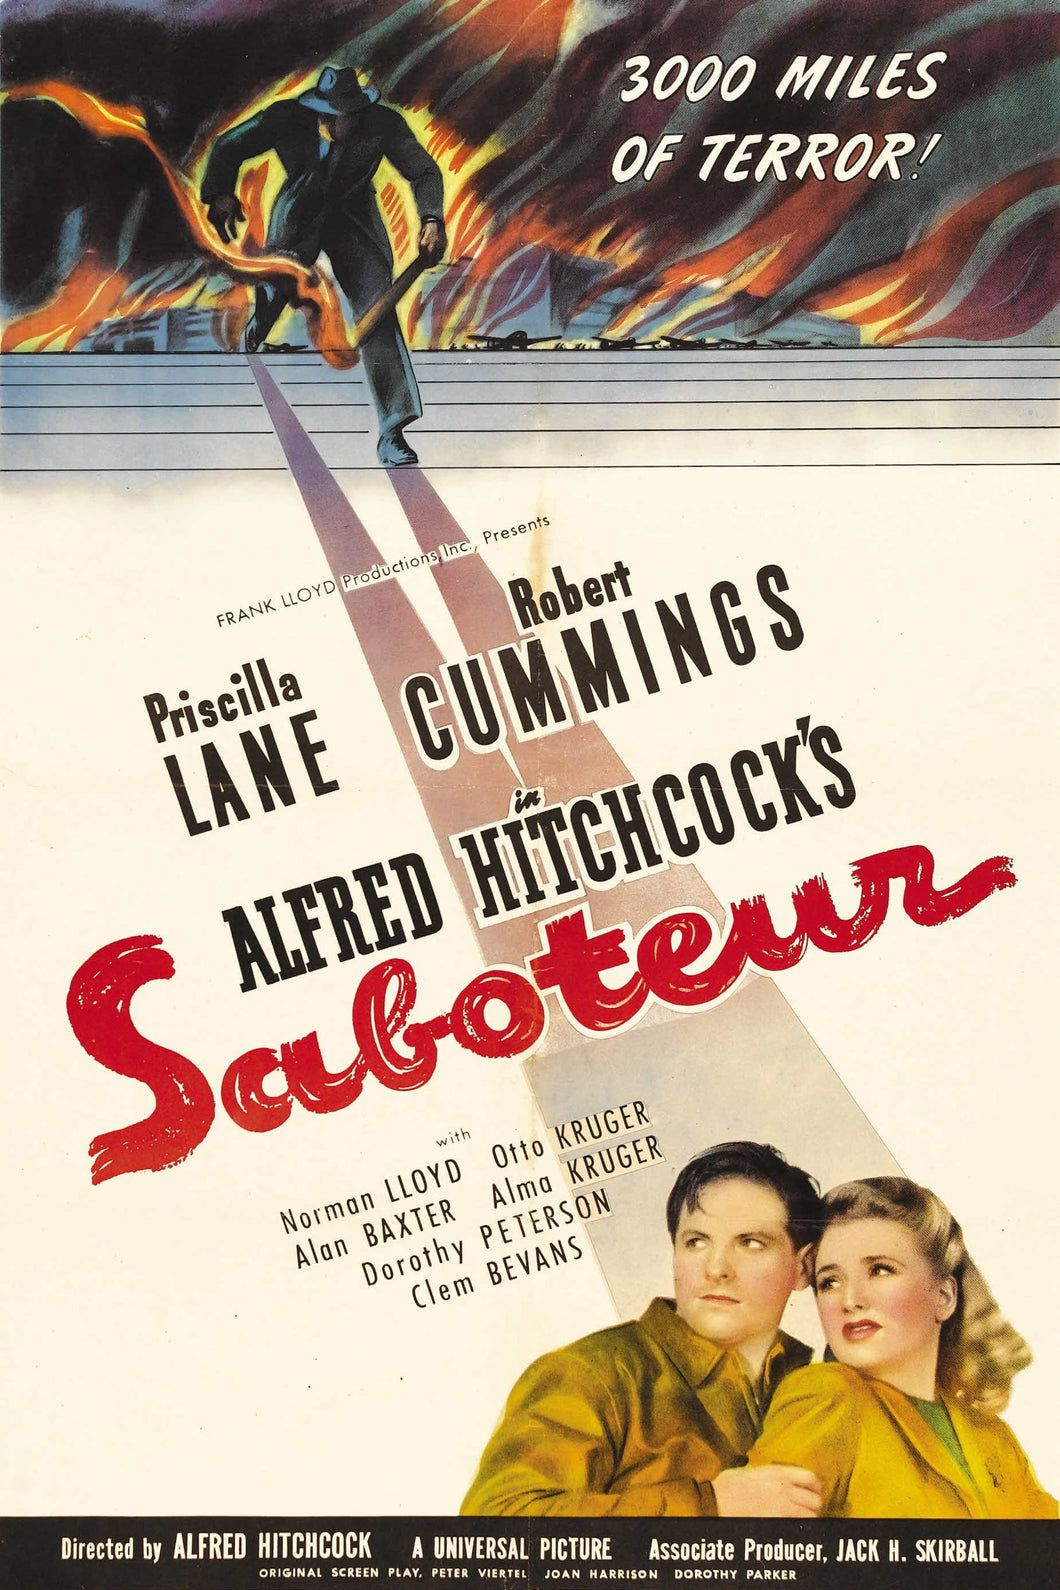 Saboteur (1942) v2 Movie Poster High Quality Glossy Paper A1 A2 A3 A4 A3 Framed or Unframed!!